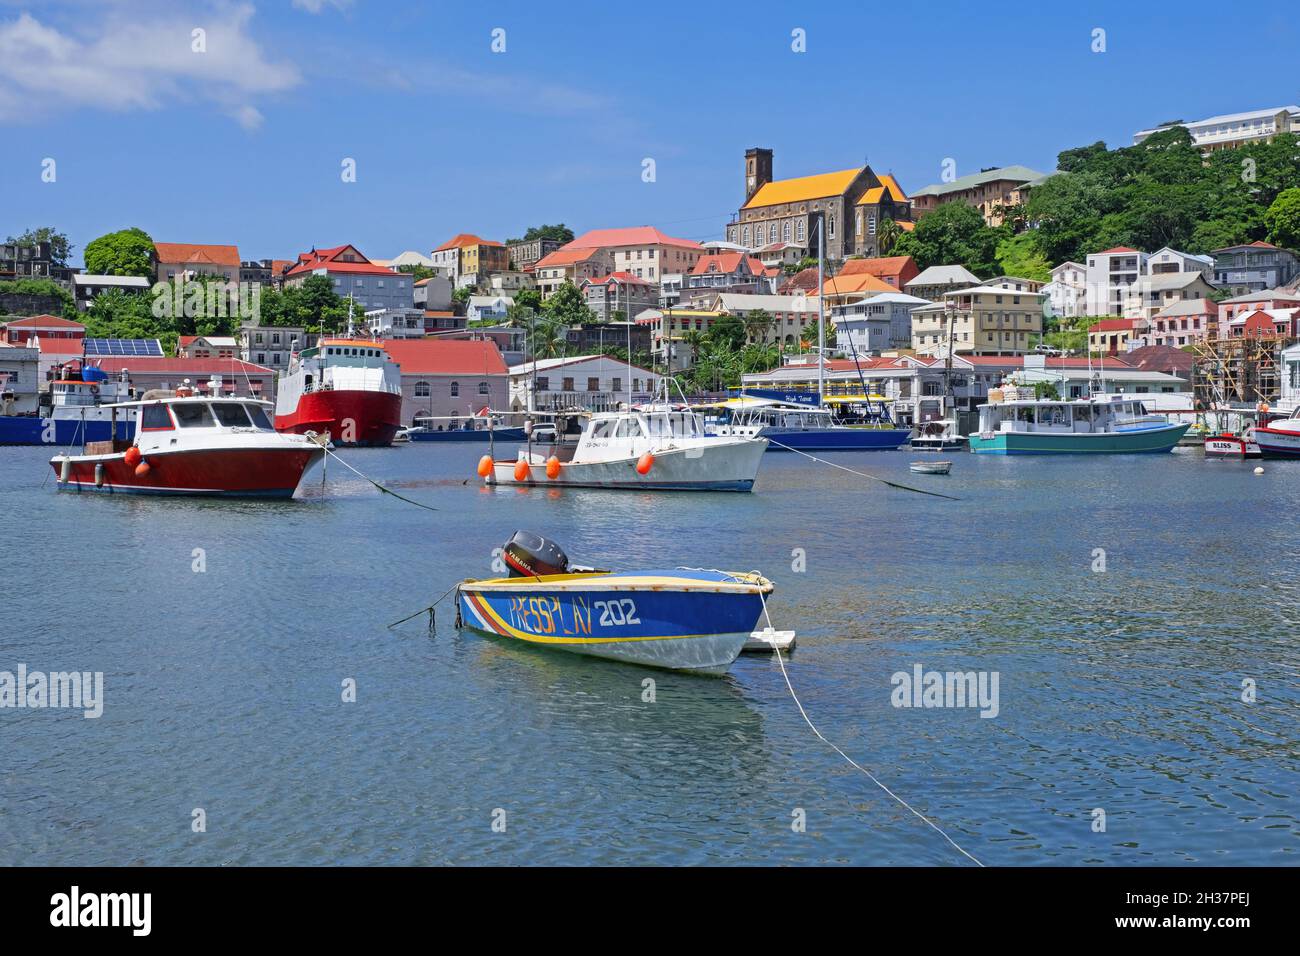 Waterfront and Roman Catholic Cathedral of the capital city St. George's on the west coast of the island of Grenada in the Caribbean Sea Stock Photo